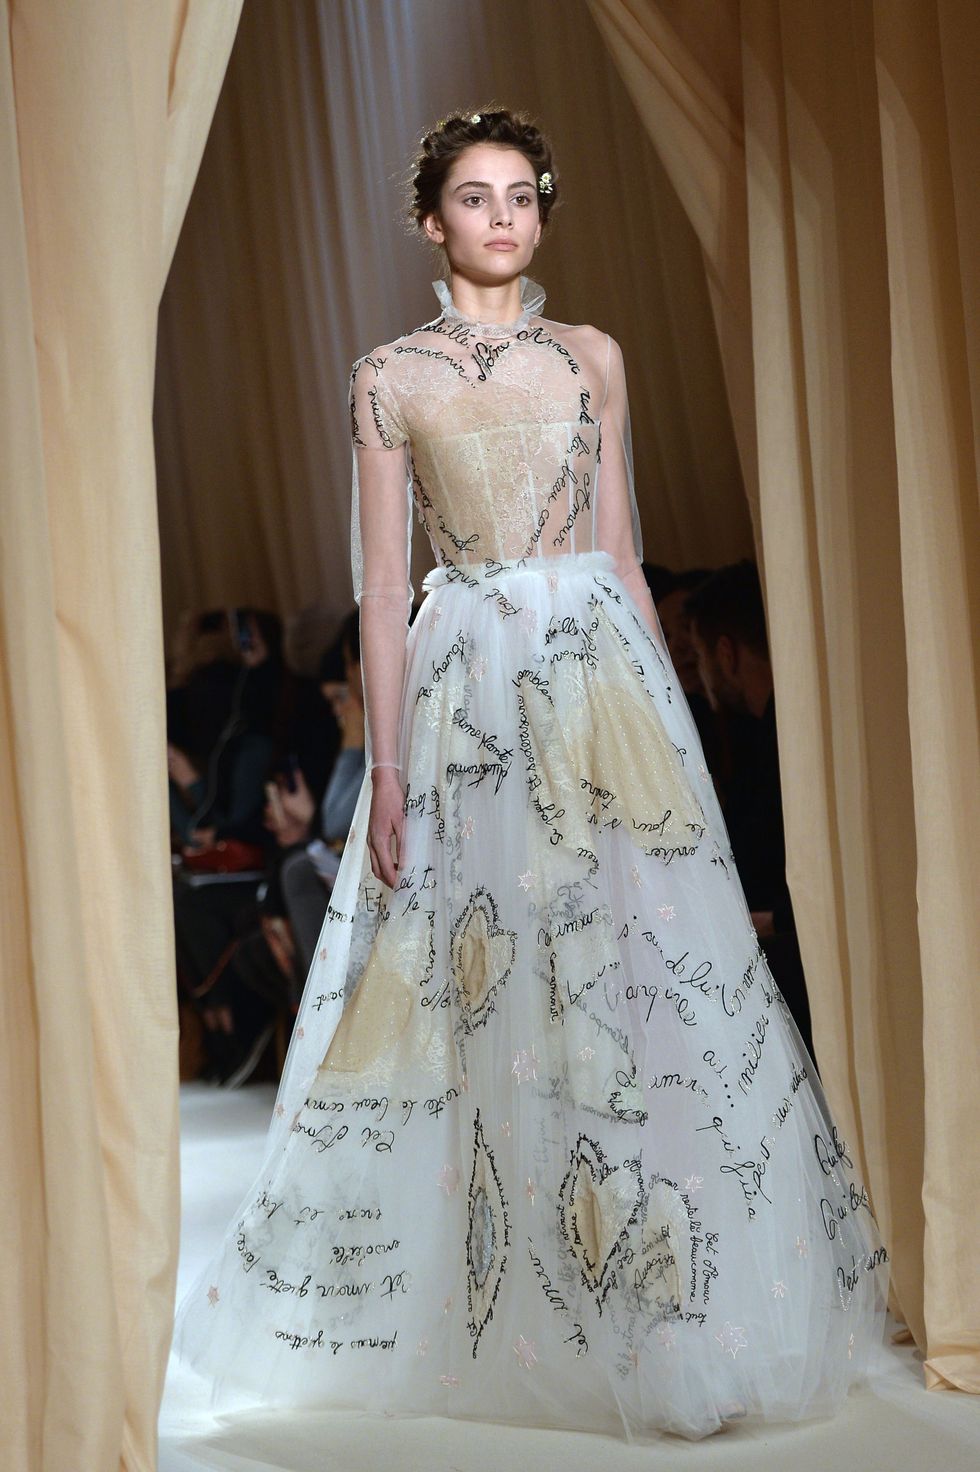 Wedding dresses from Paris Haute Couture Fashion Week to inspire